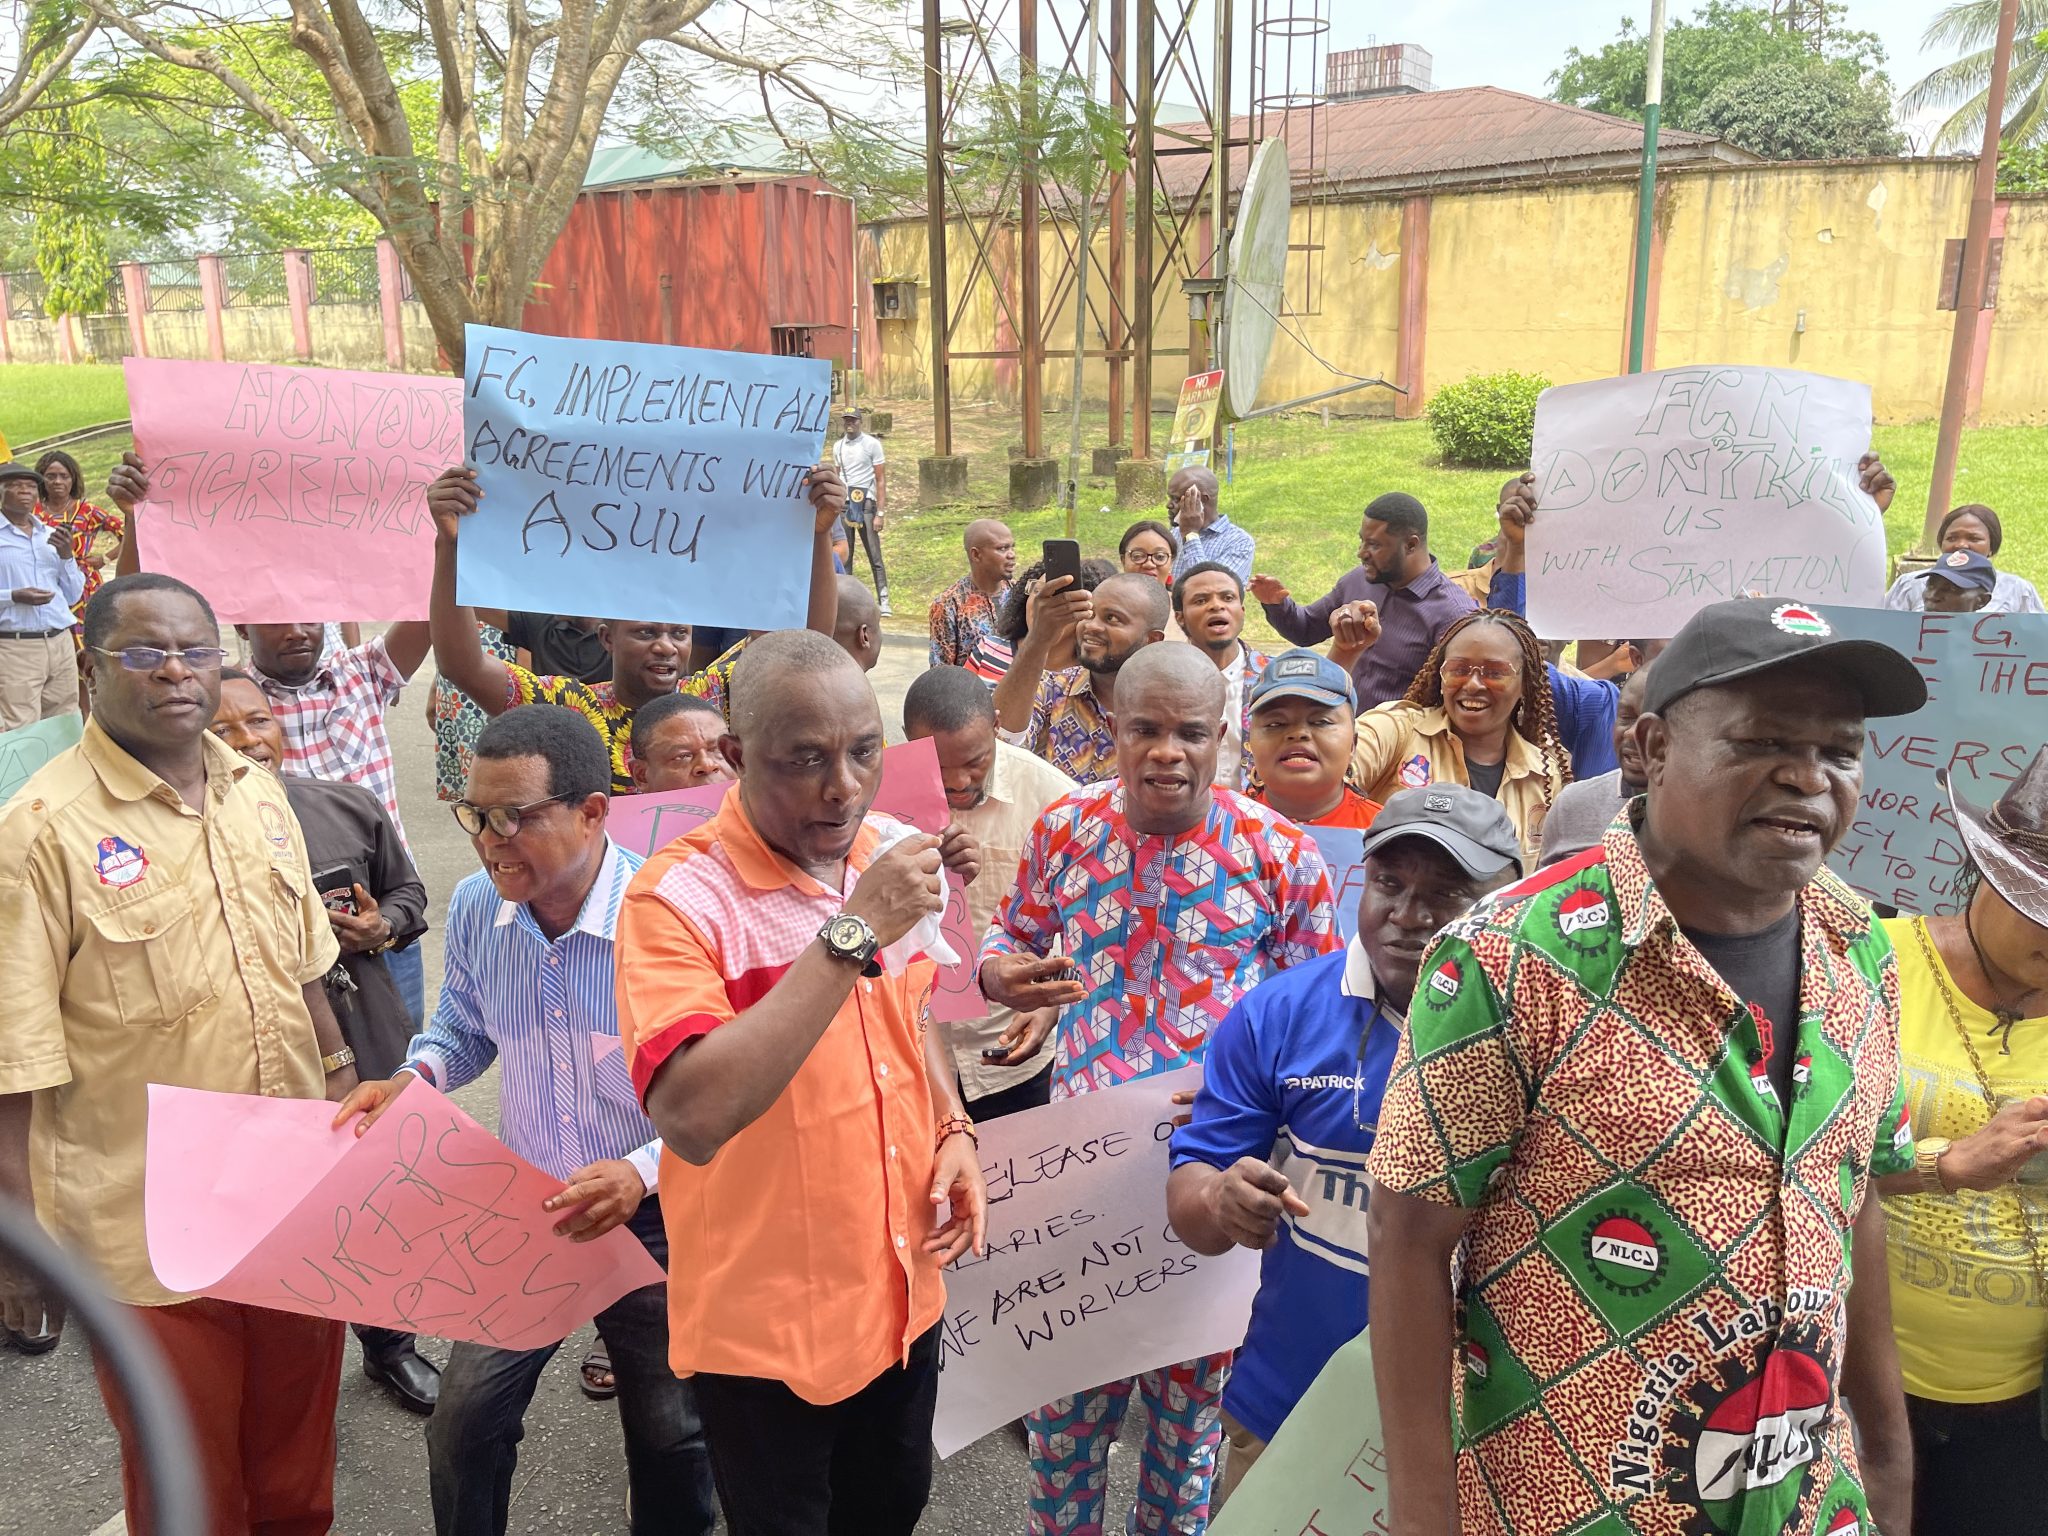 ASUU protest over unpaid salaries in UNICAL